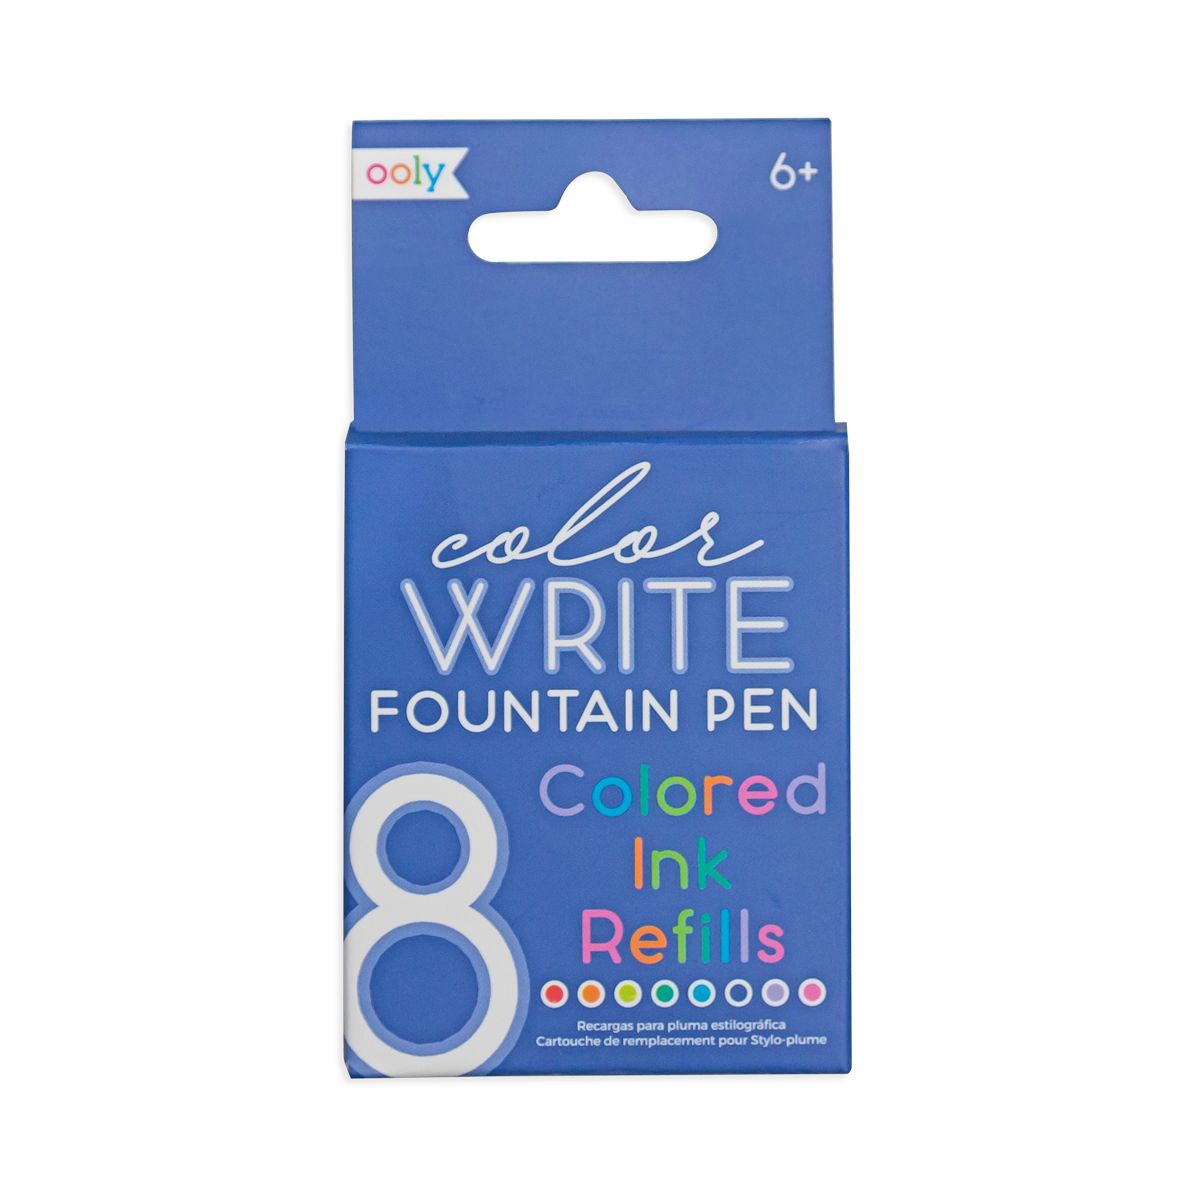 Ooly Color Write Fountain Pens Colored Ink Refills